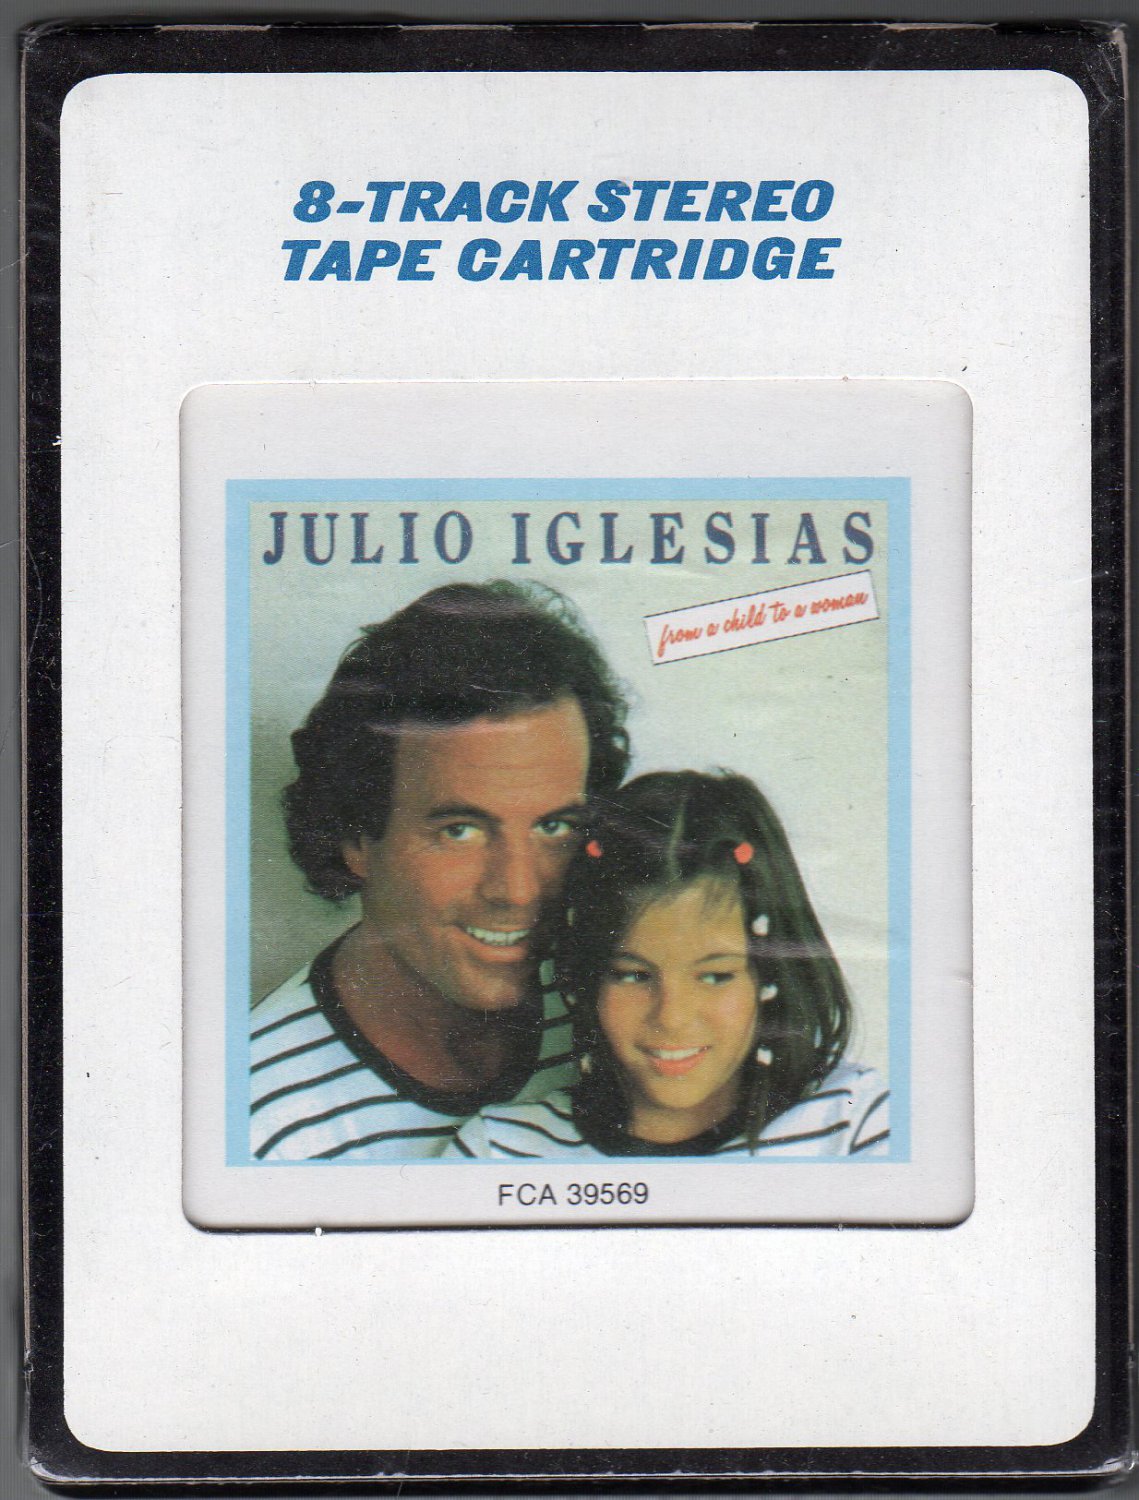 Julio Iglesias - From A Child To A Woman 1981 CRC Sealed 8-track tape